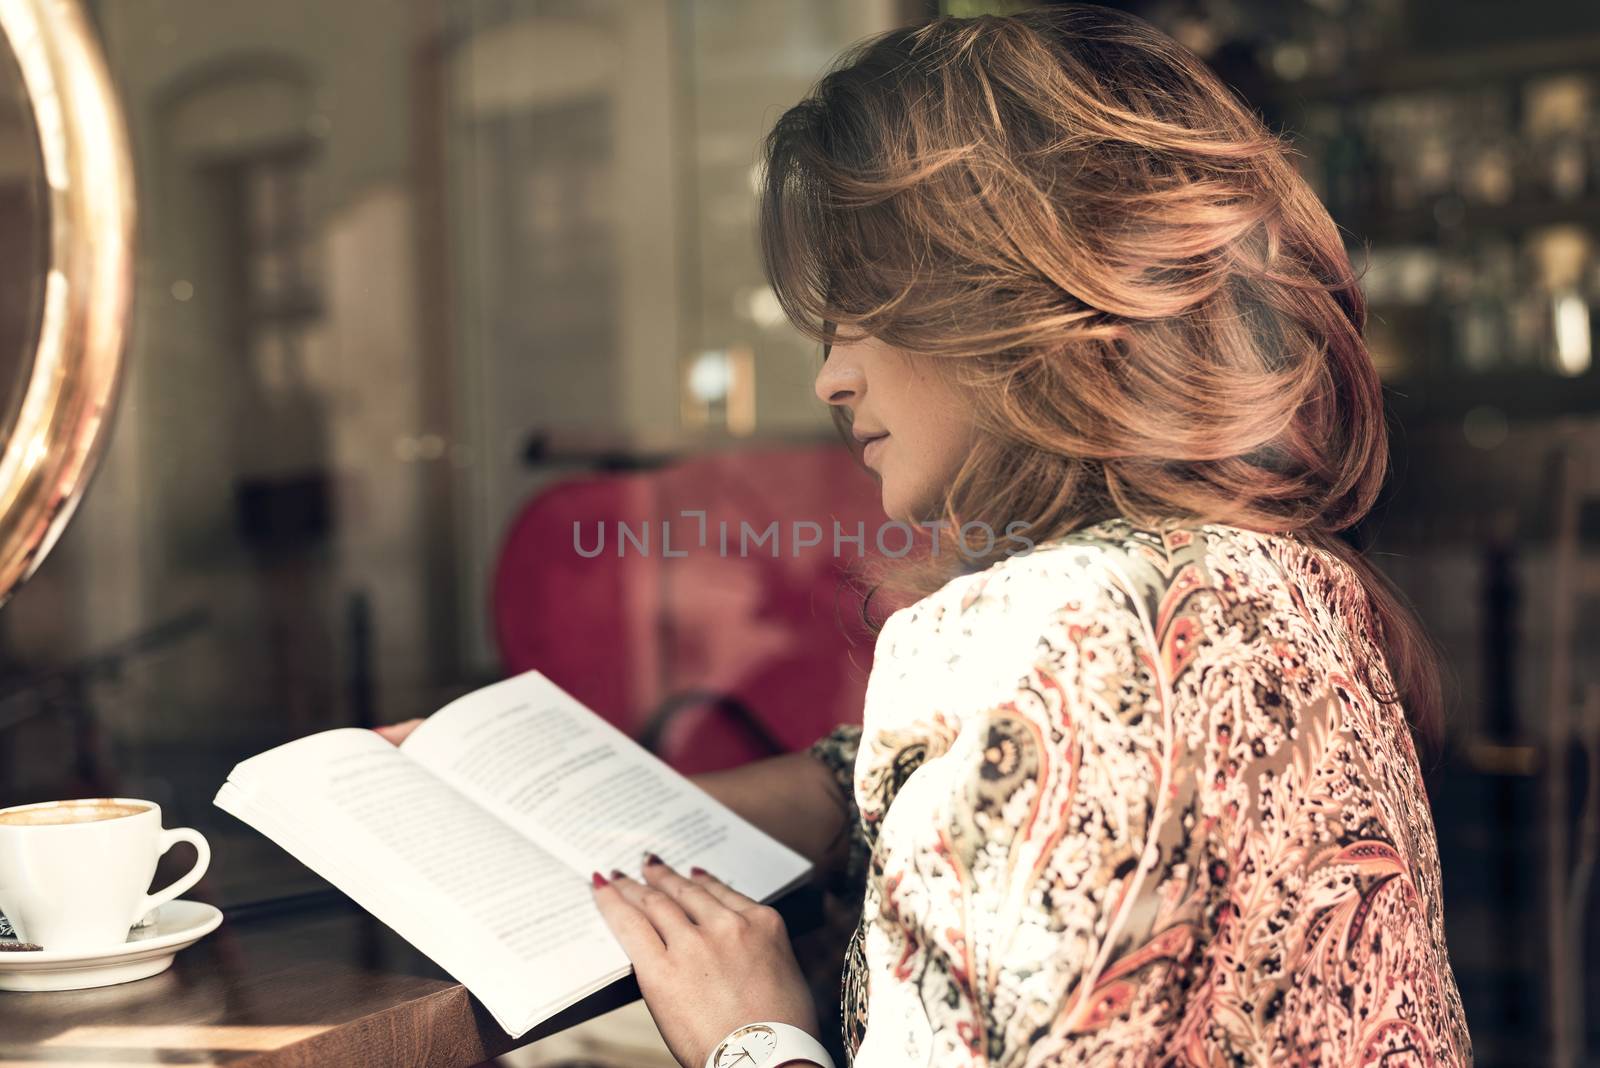 Woman reading book by wdnet_studio